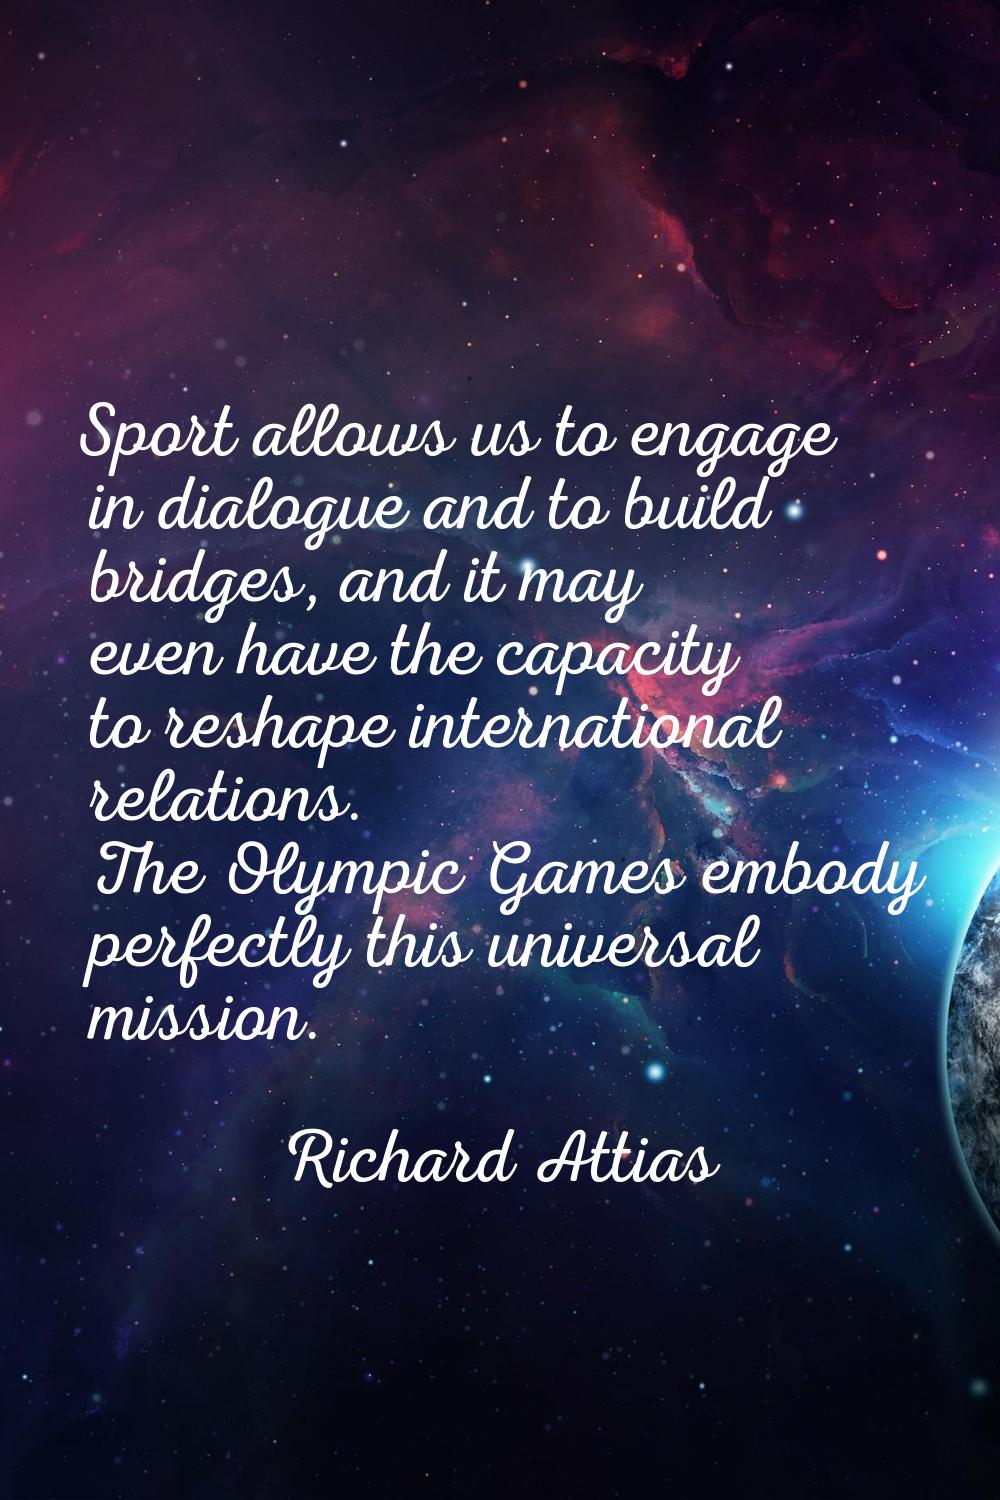 Sport allows us to engage in dialogue and to build bridges, and it may even have the capacity to re